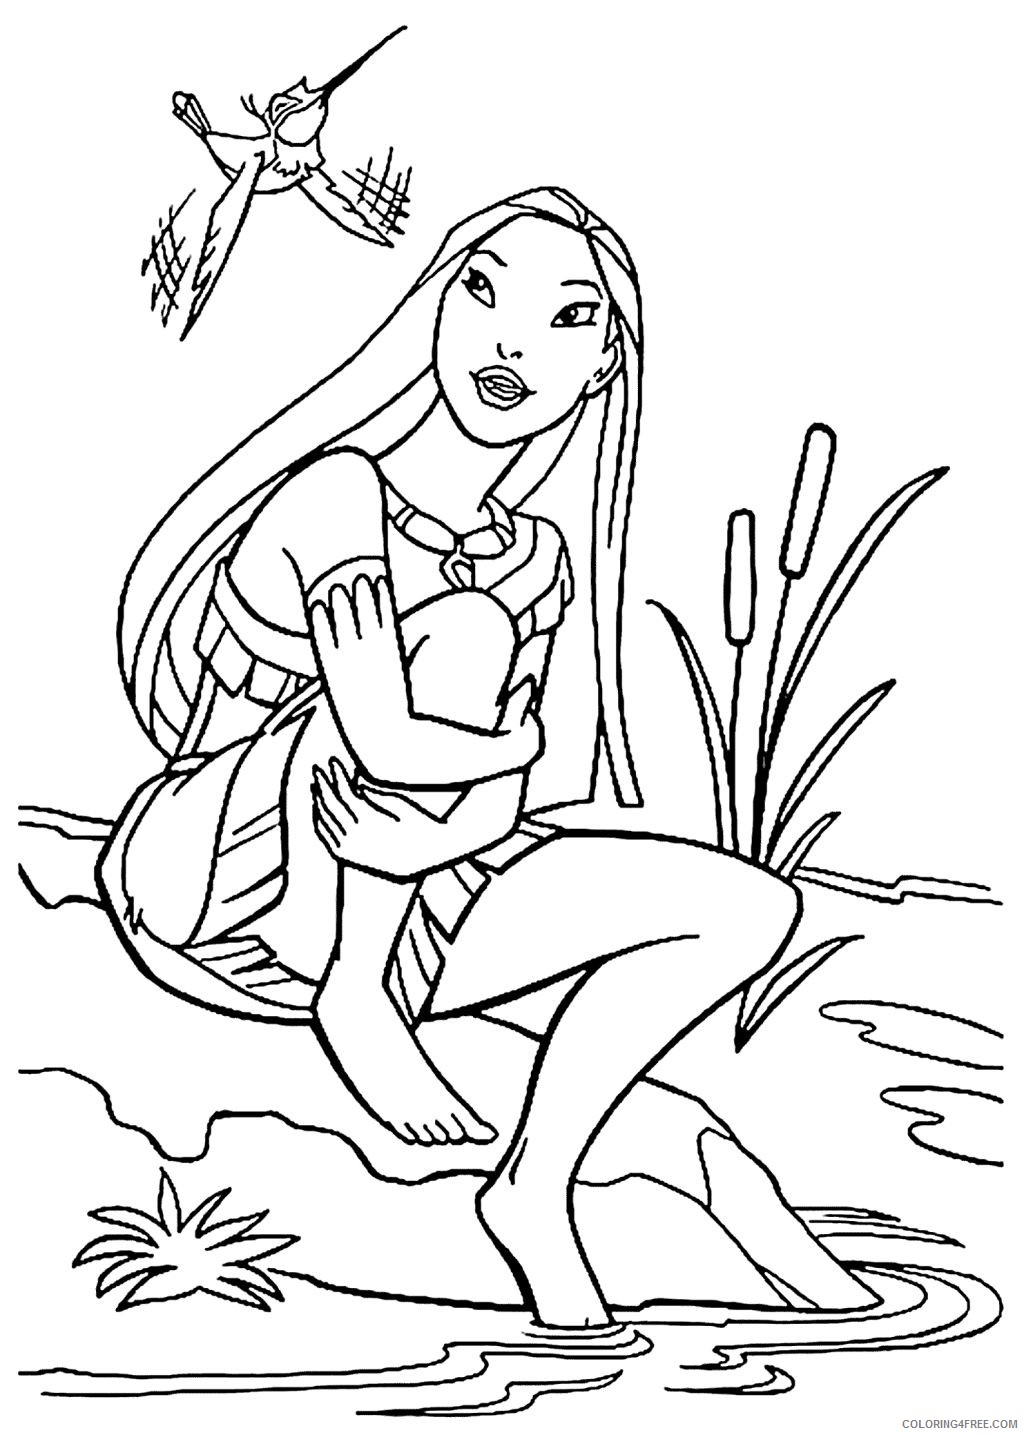 pocahontas coloring pages sitting by the river Coloring4free